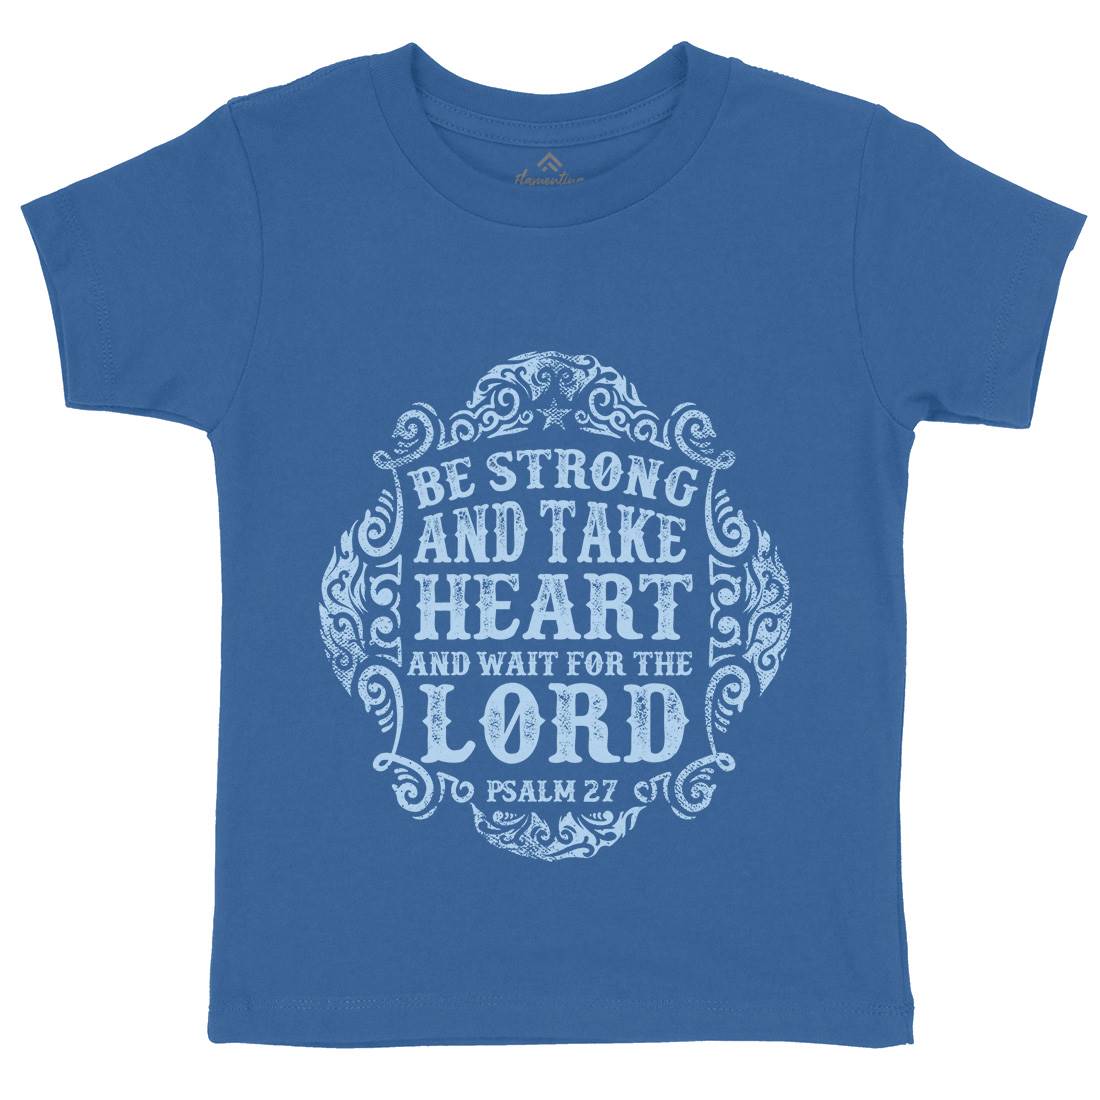 Be Strong And Wait The Lord Kids Crew Neck T-Shirt Religion C909